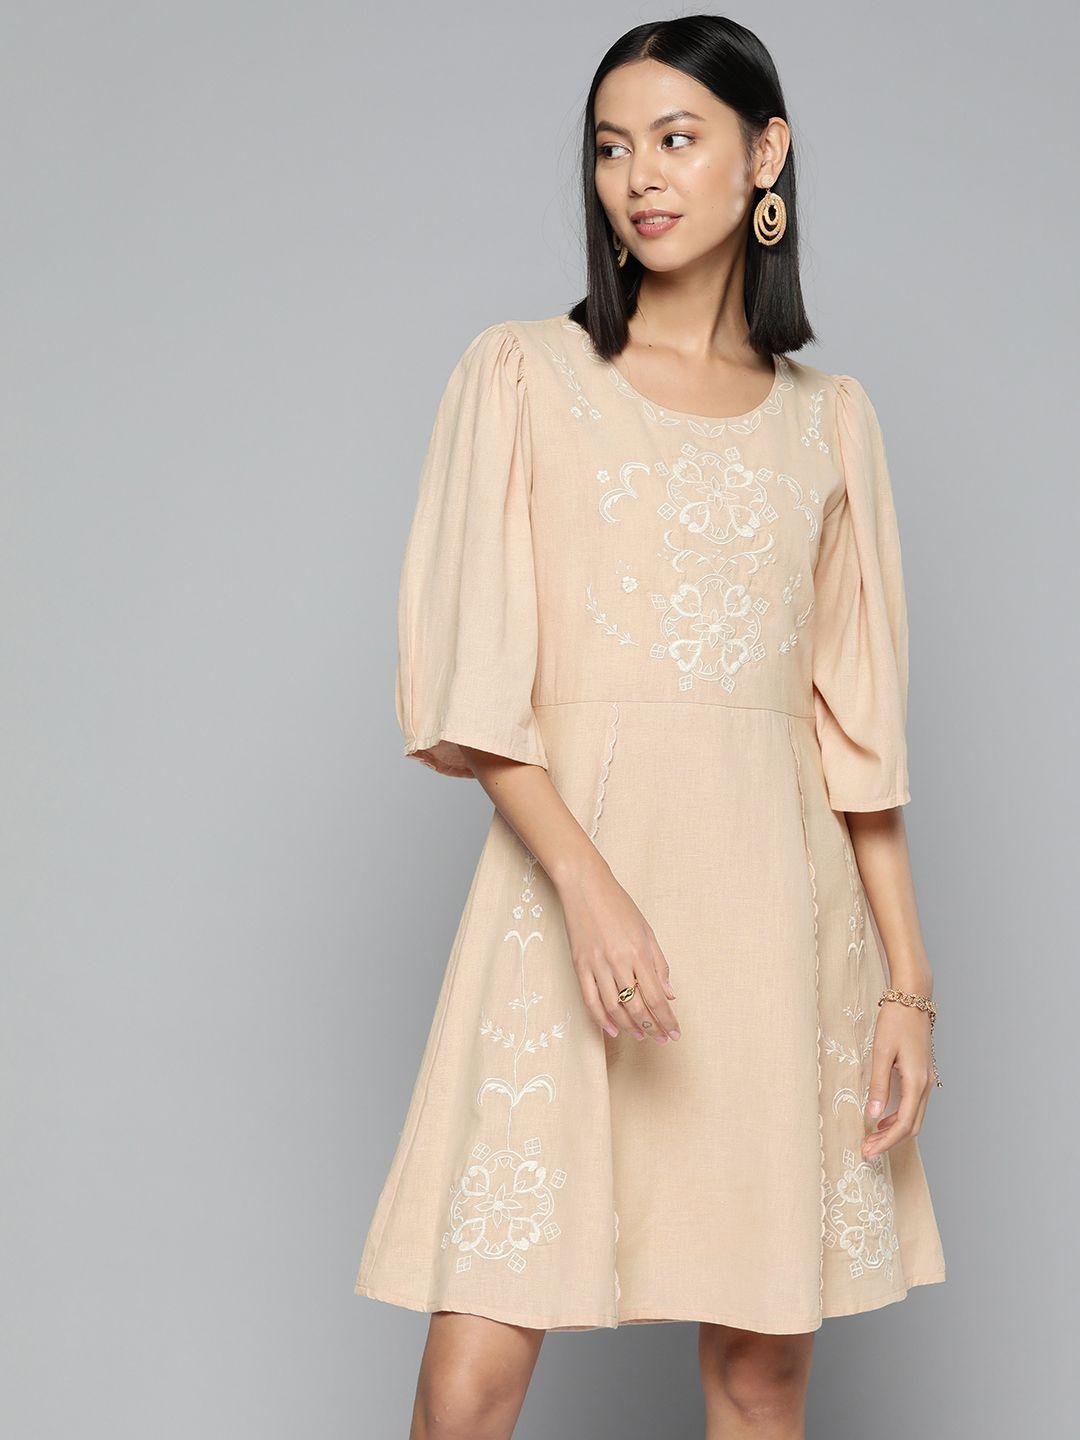 scoup-floral-embroidered-a-line-dress